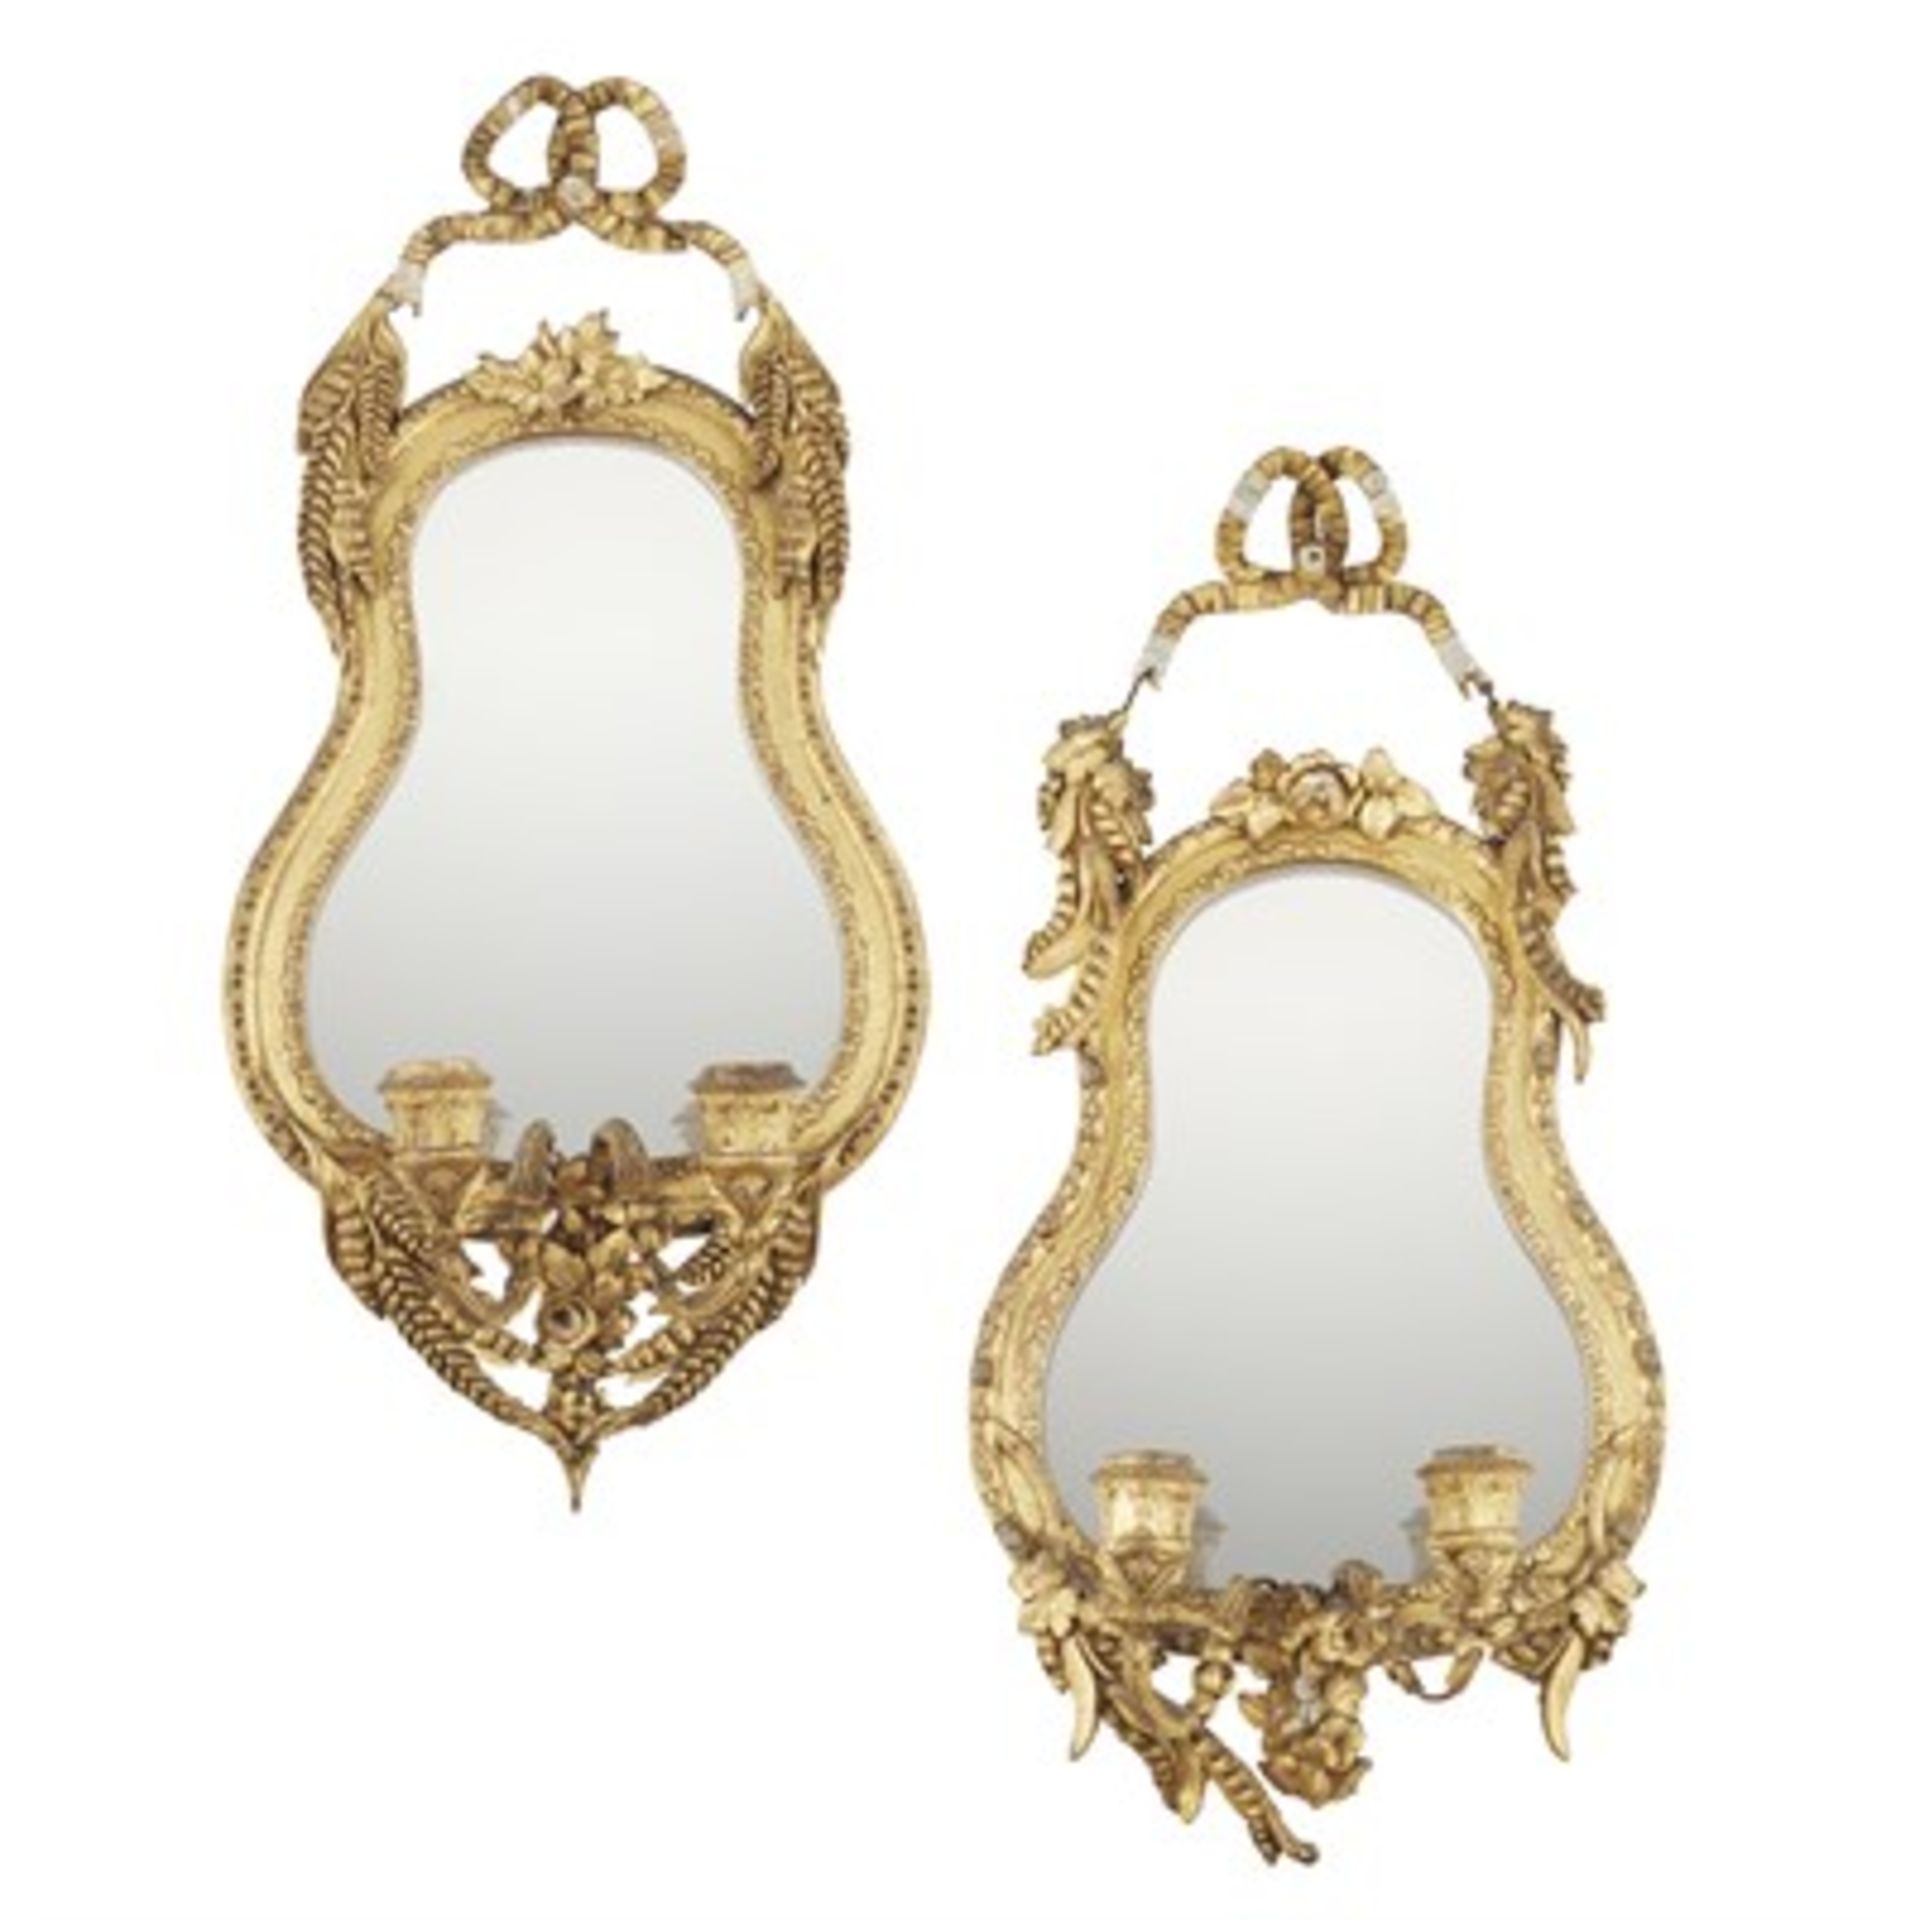 NEAR PAIR OF VICTORIAN GESSO AND GILTWOOD GIRANDOLE MIRRORS 19TH CENTURY the cartouche shaped mirror